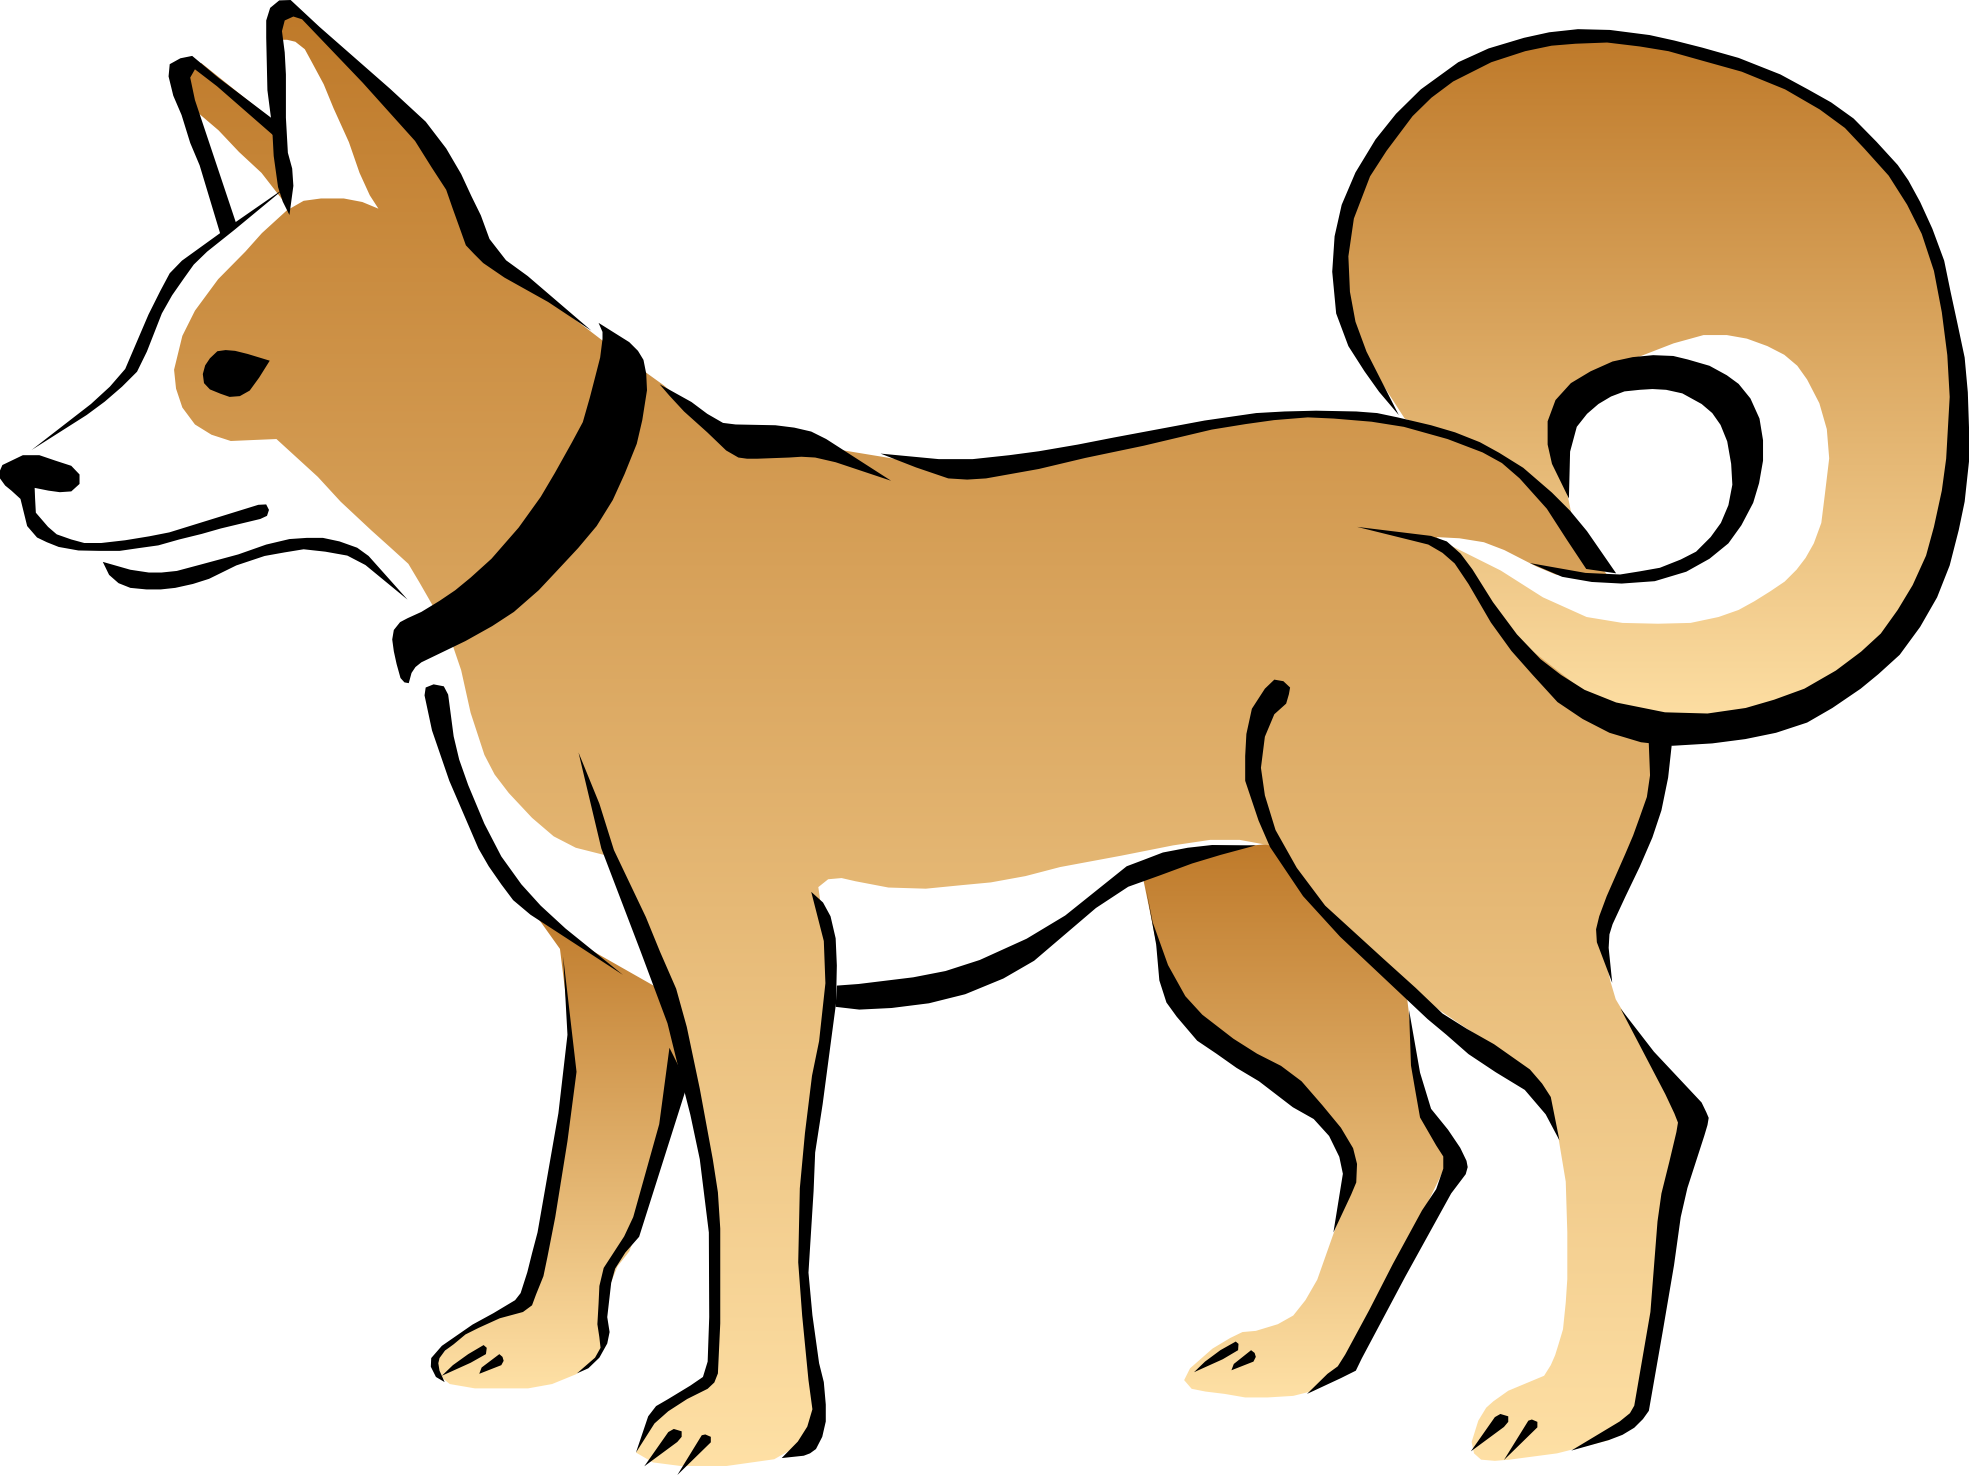 Clipart Of Dog - ClipArt Best